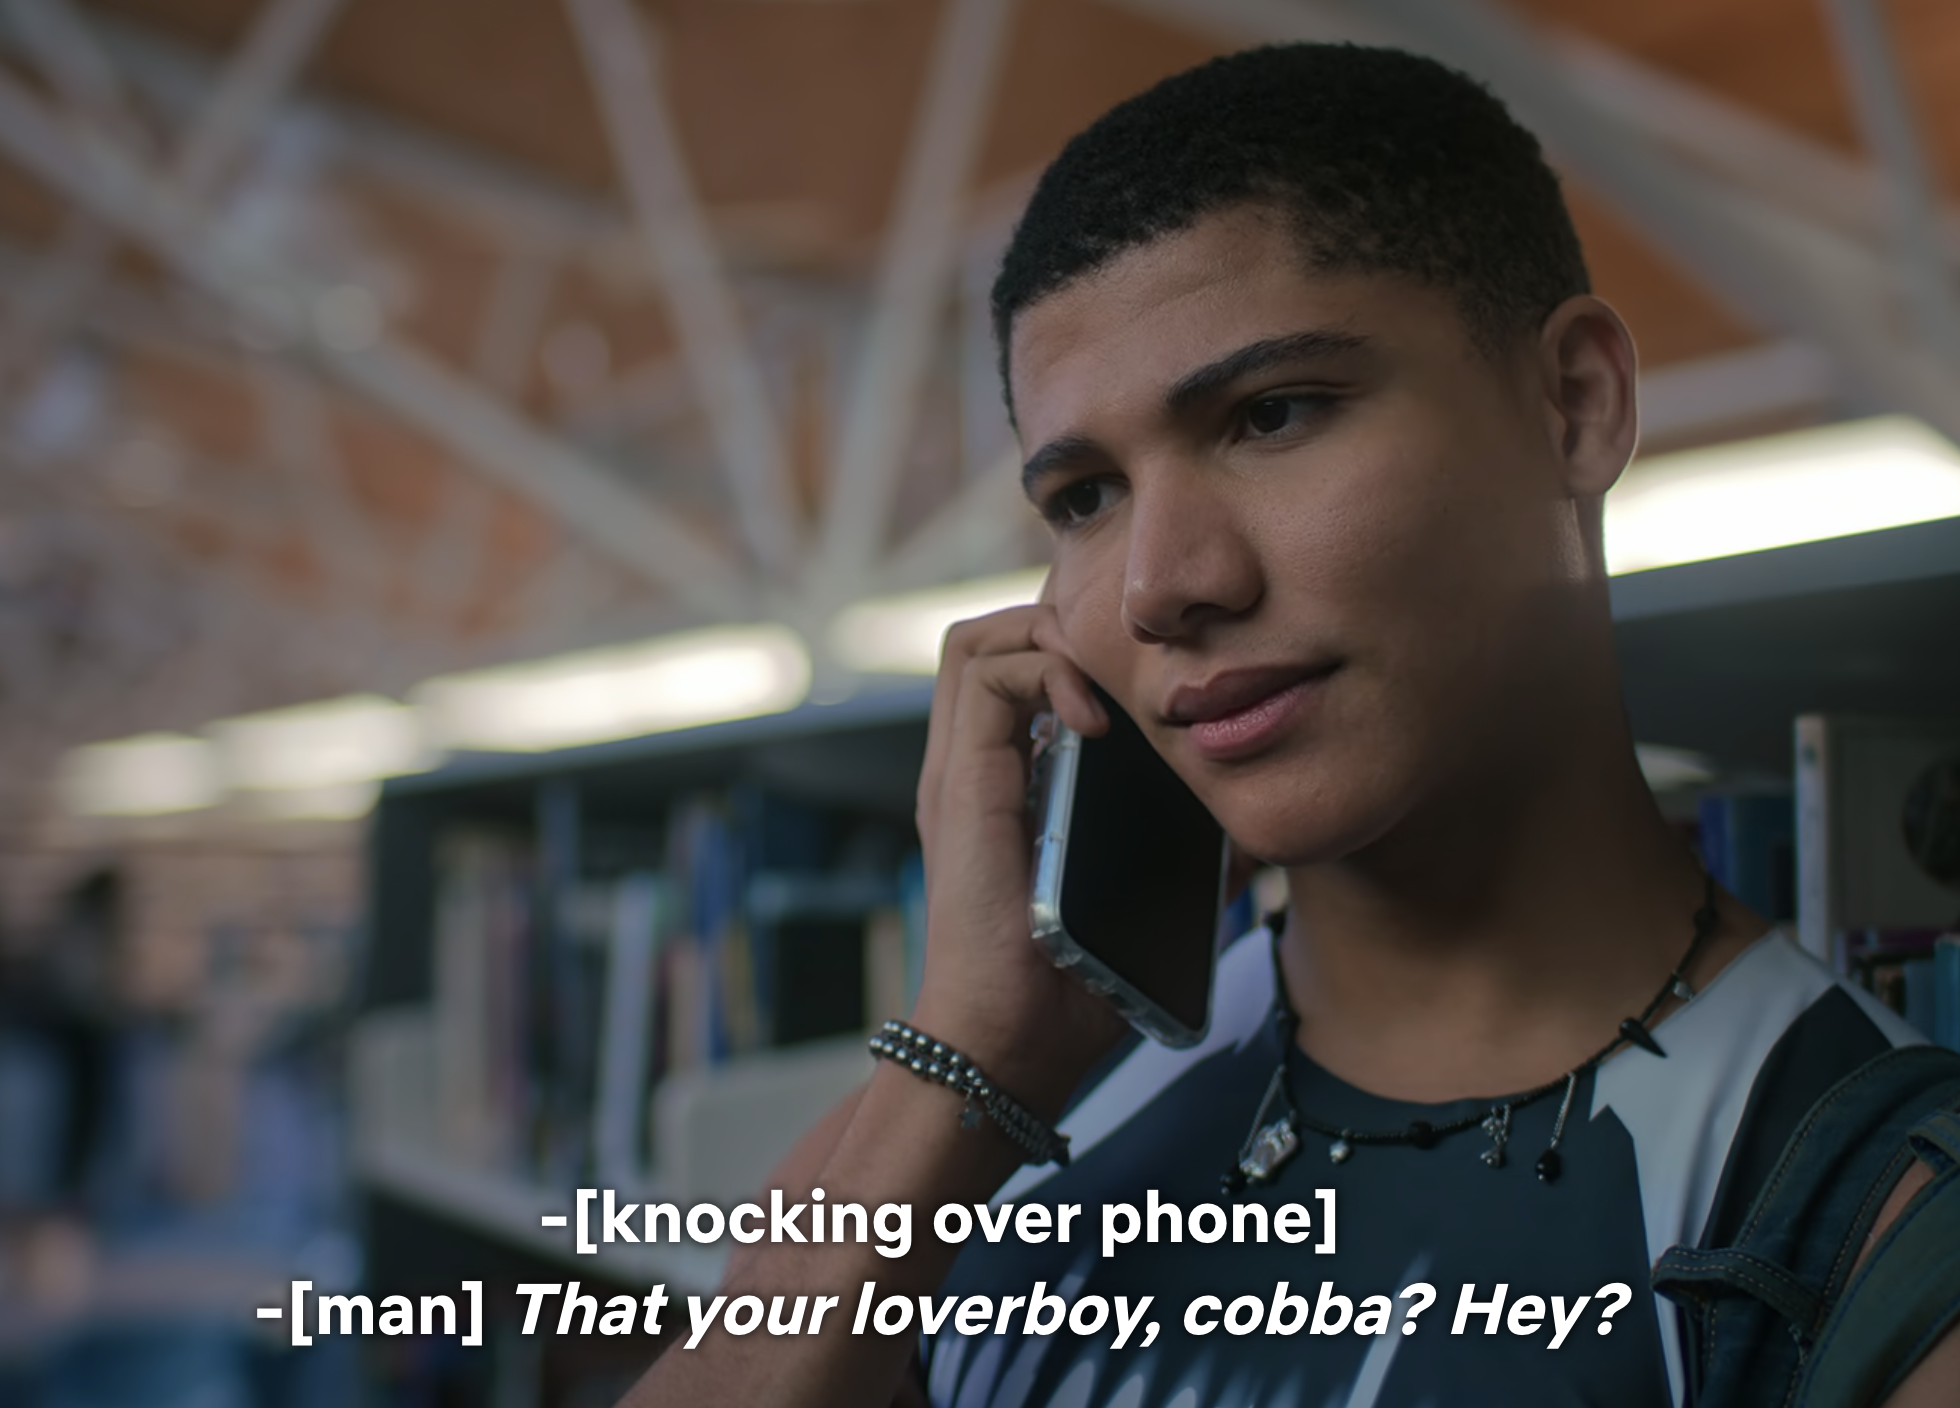 Miguel from Cobra Kai on a phone call in a school hallway; subtitles depict mocking dialogue